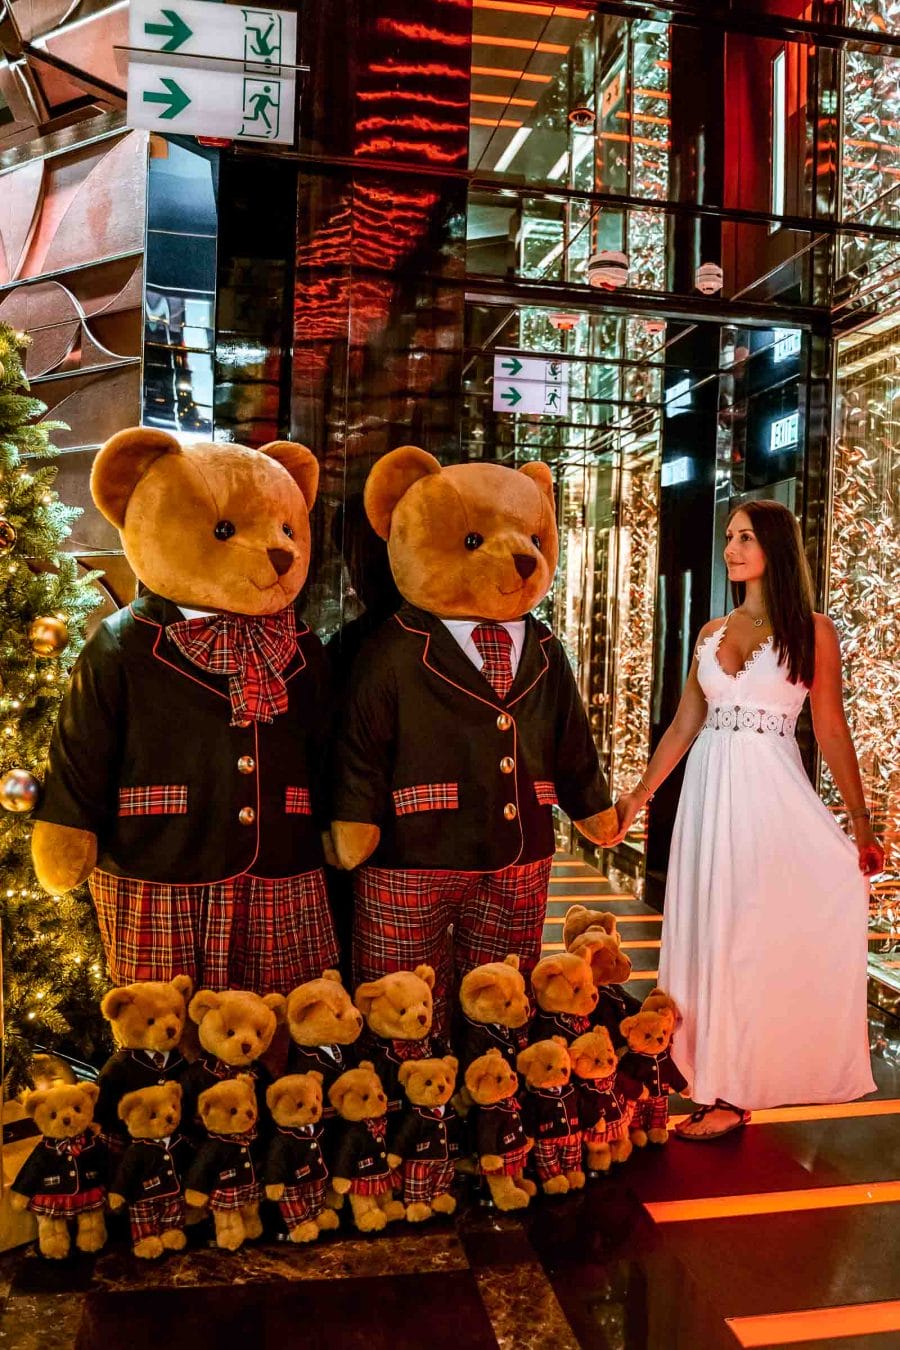 Girl in a white dress holding hands with a stuffed bear which is a part of the Christmas decoration